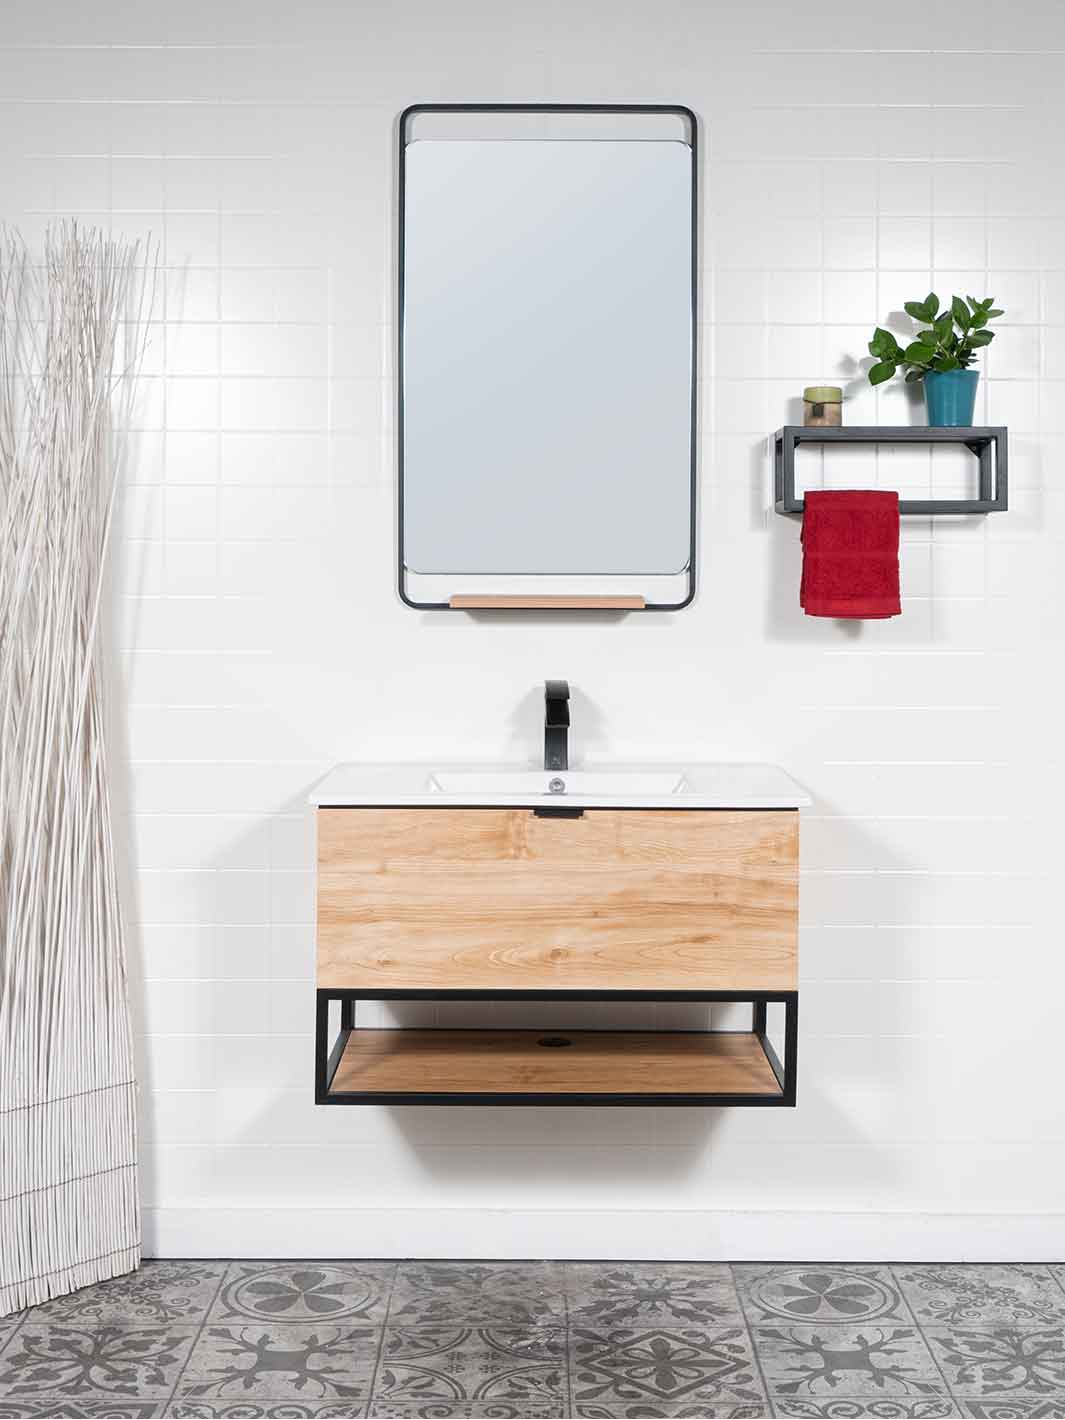 Floating style vanity with beech finish, black aluminum framed mirror, ceramic sink, and chrome faucet